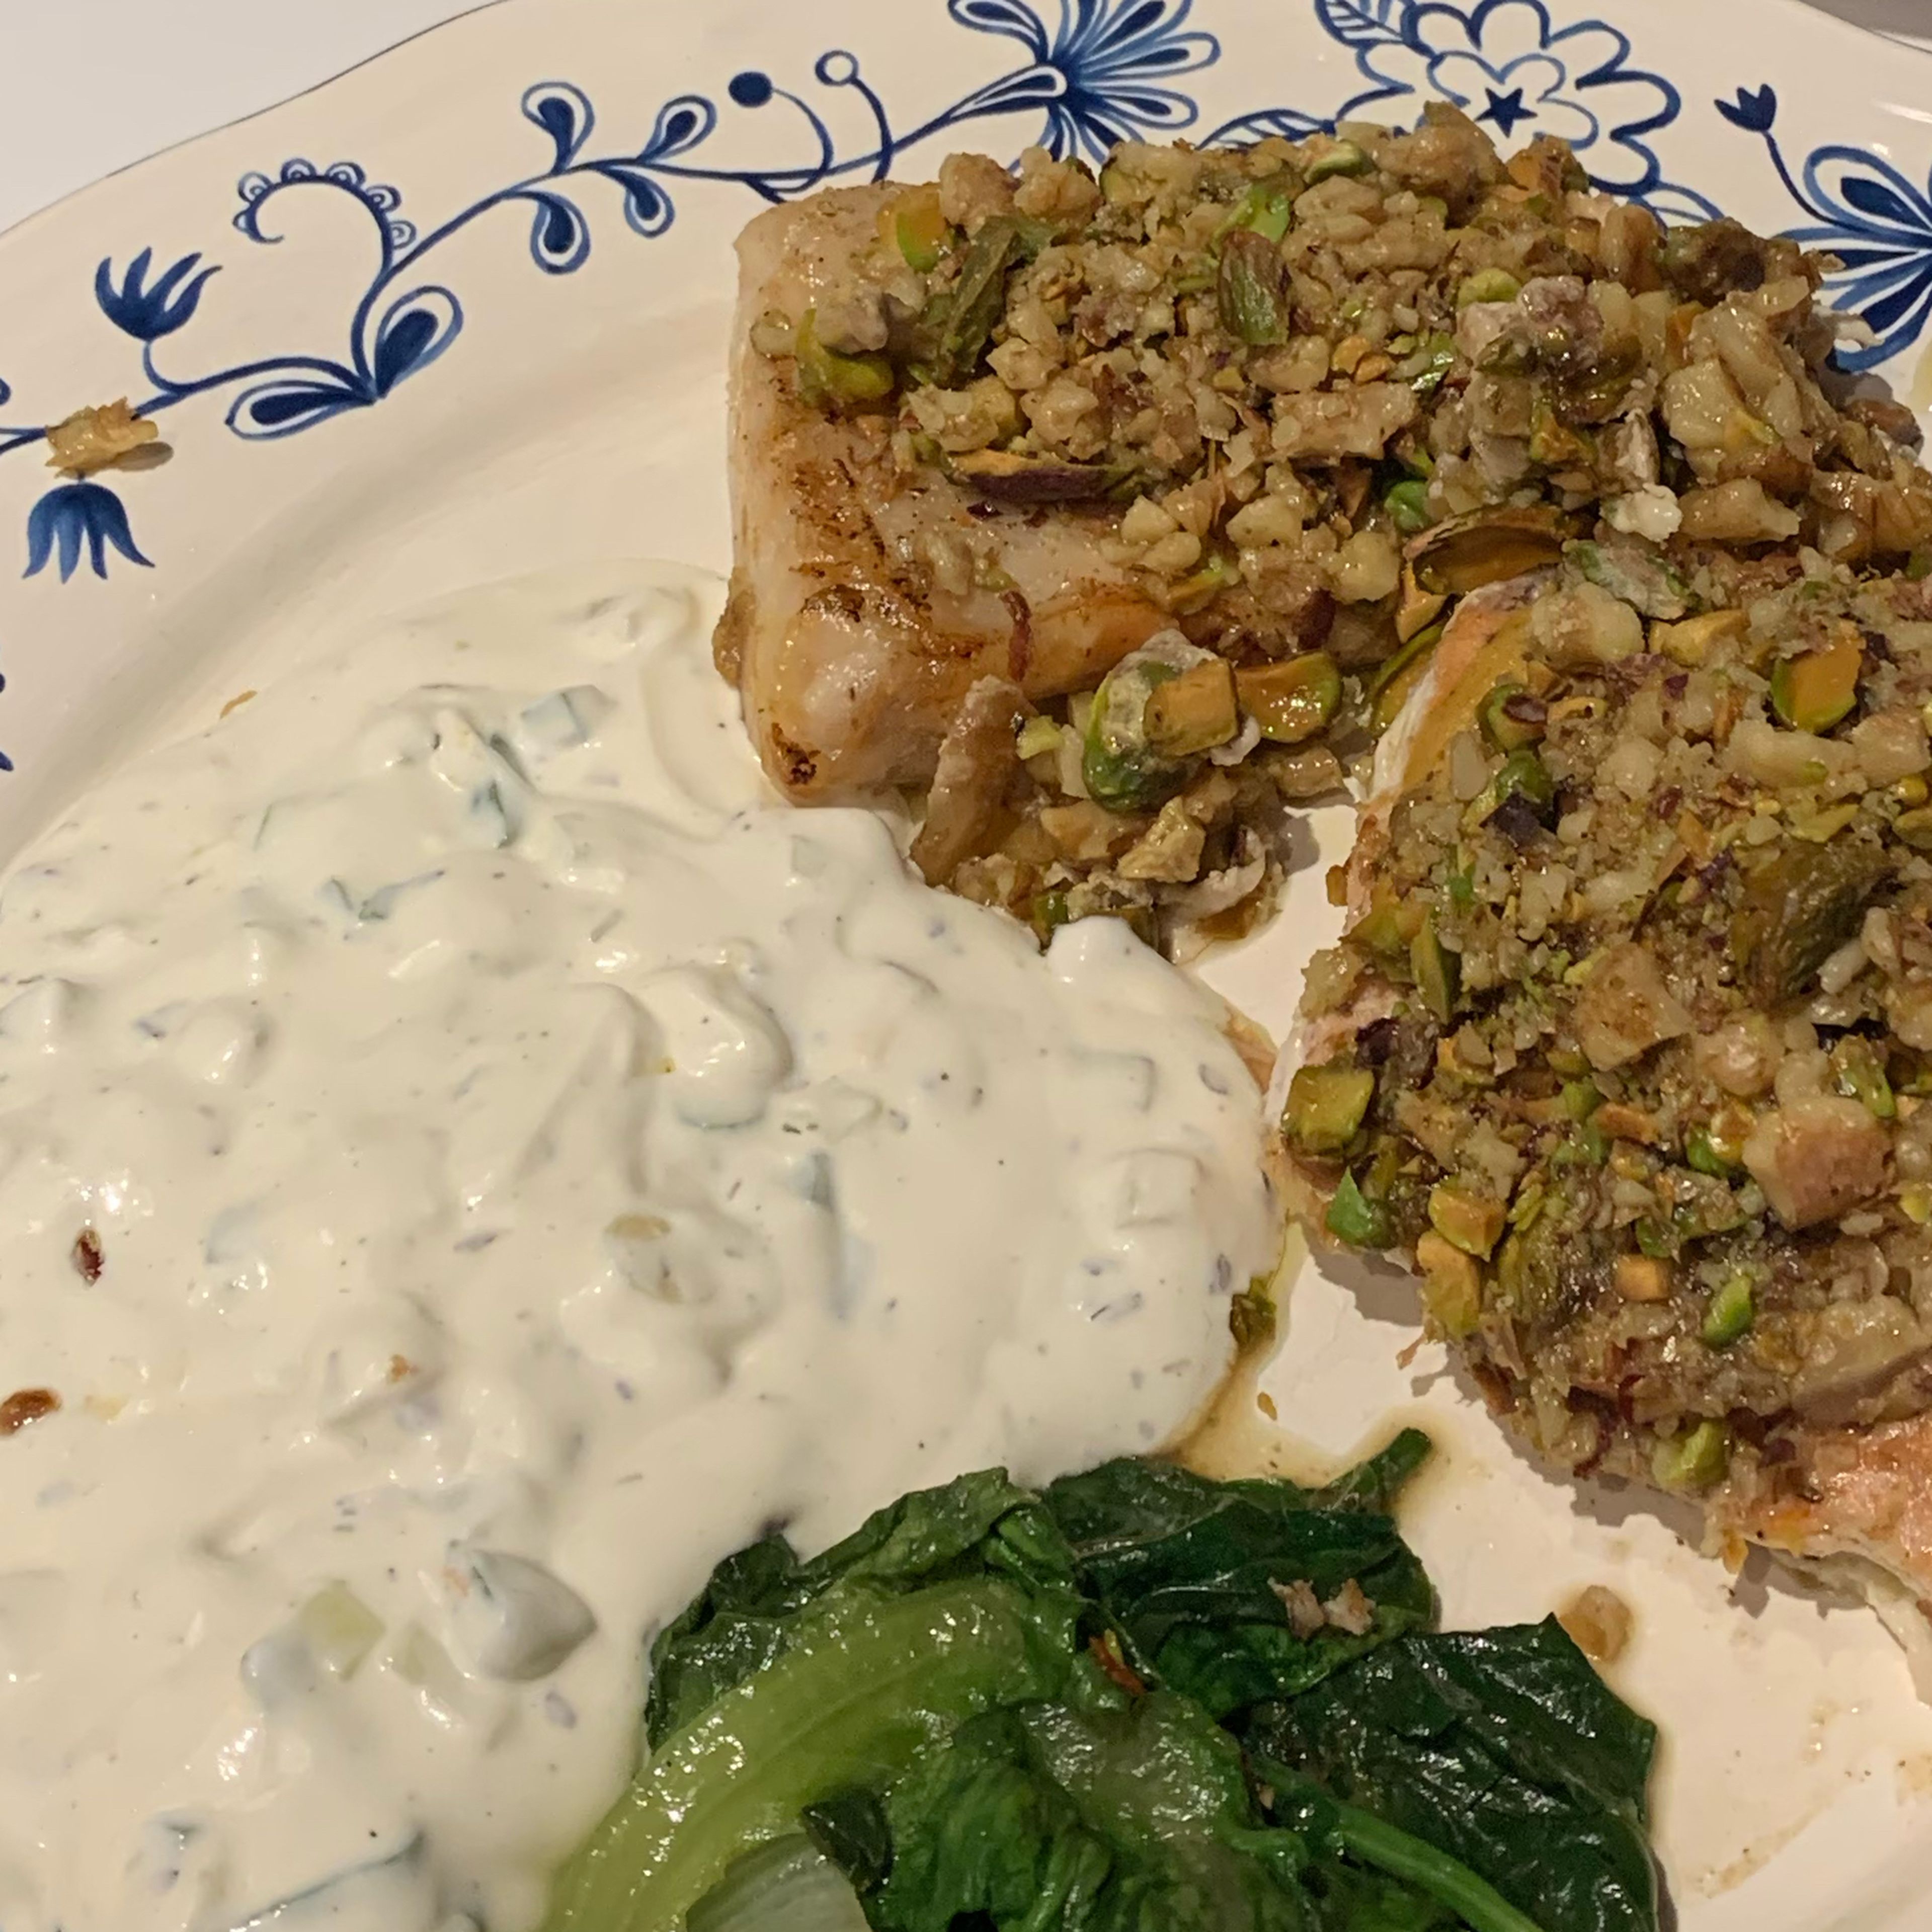 Keto salmon with nuts, salad and dressing